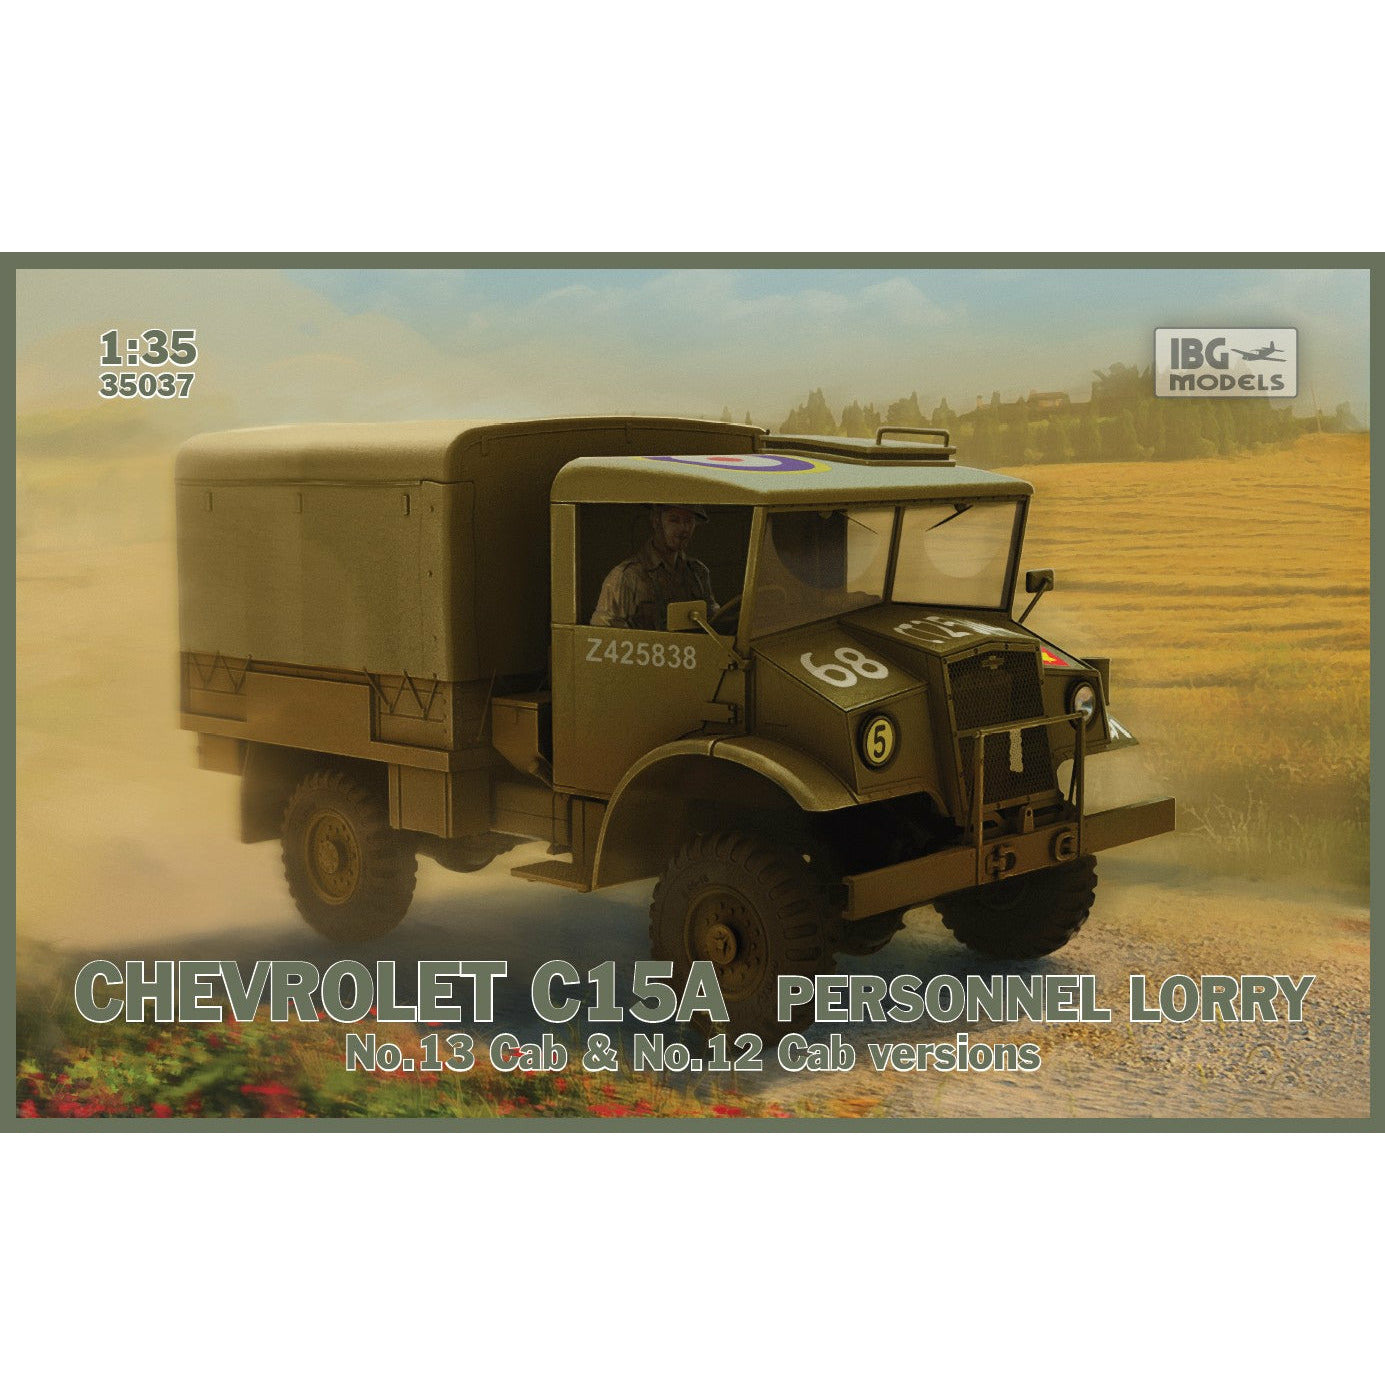 Chevrolet C15A Personnel Lorry 1/35 #35037 by IBG Models